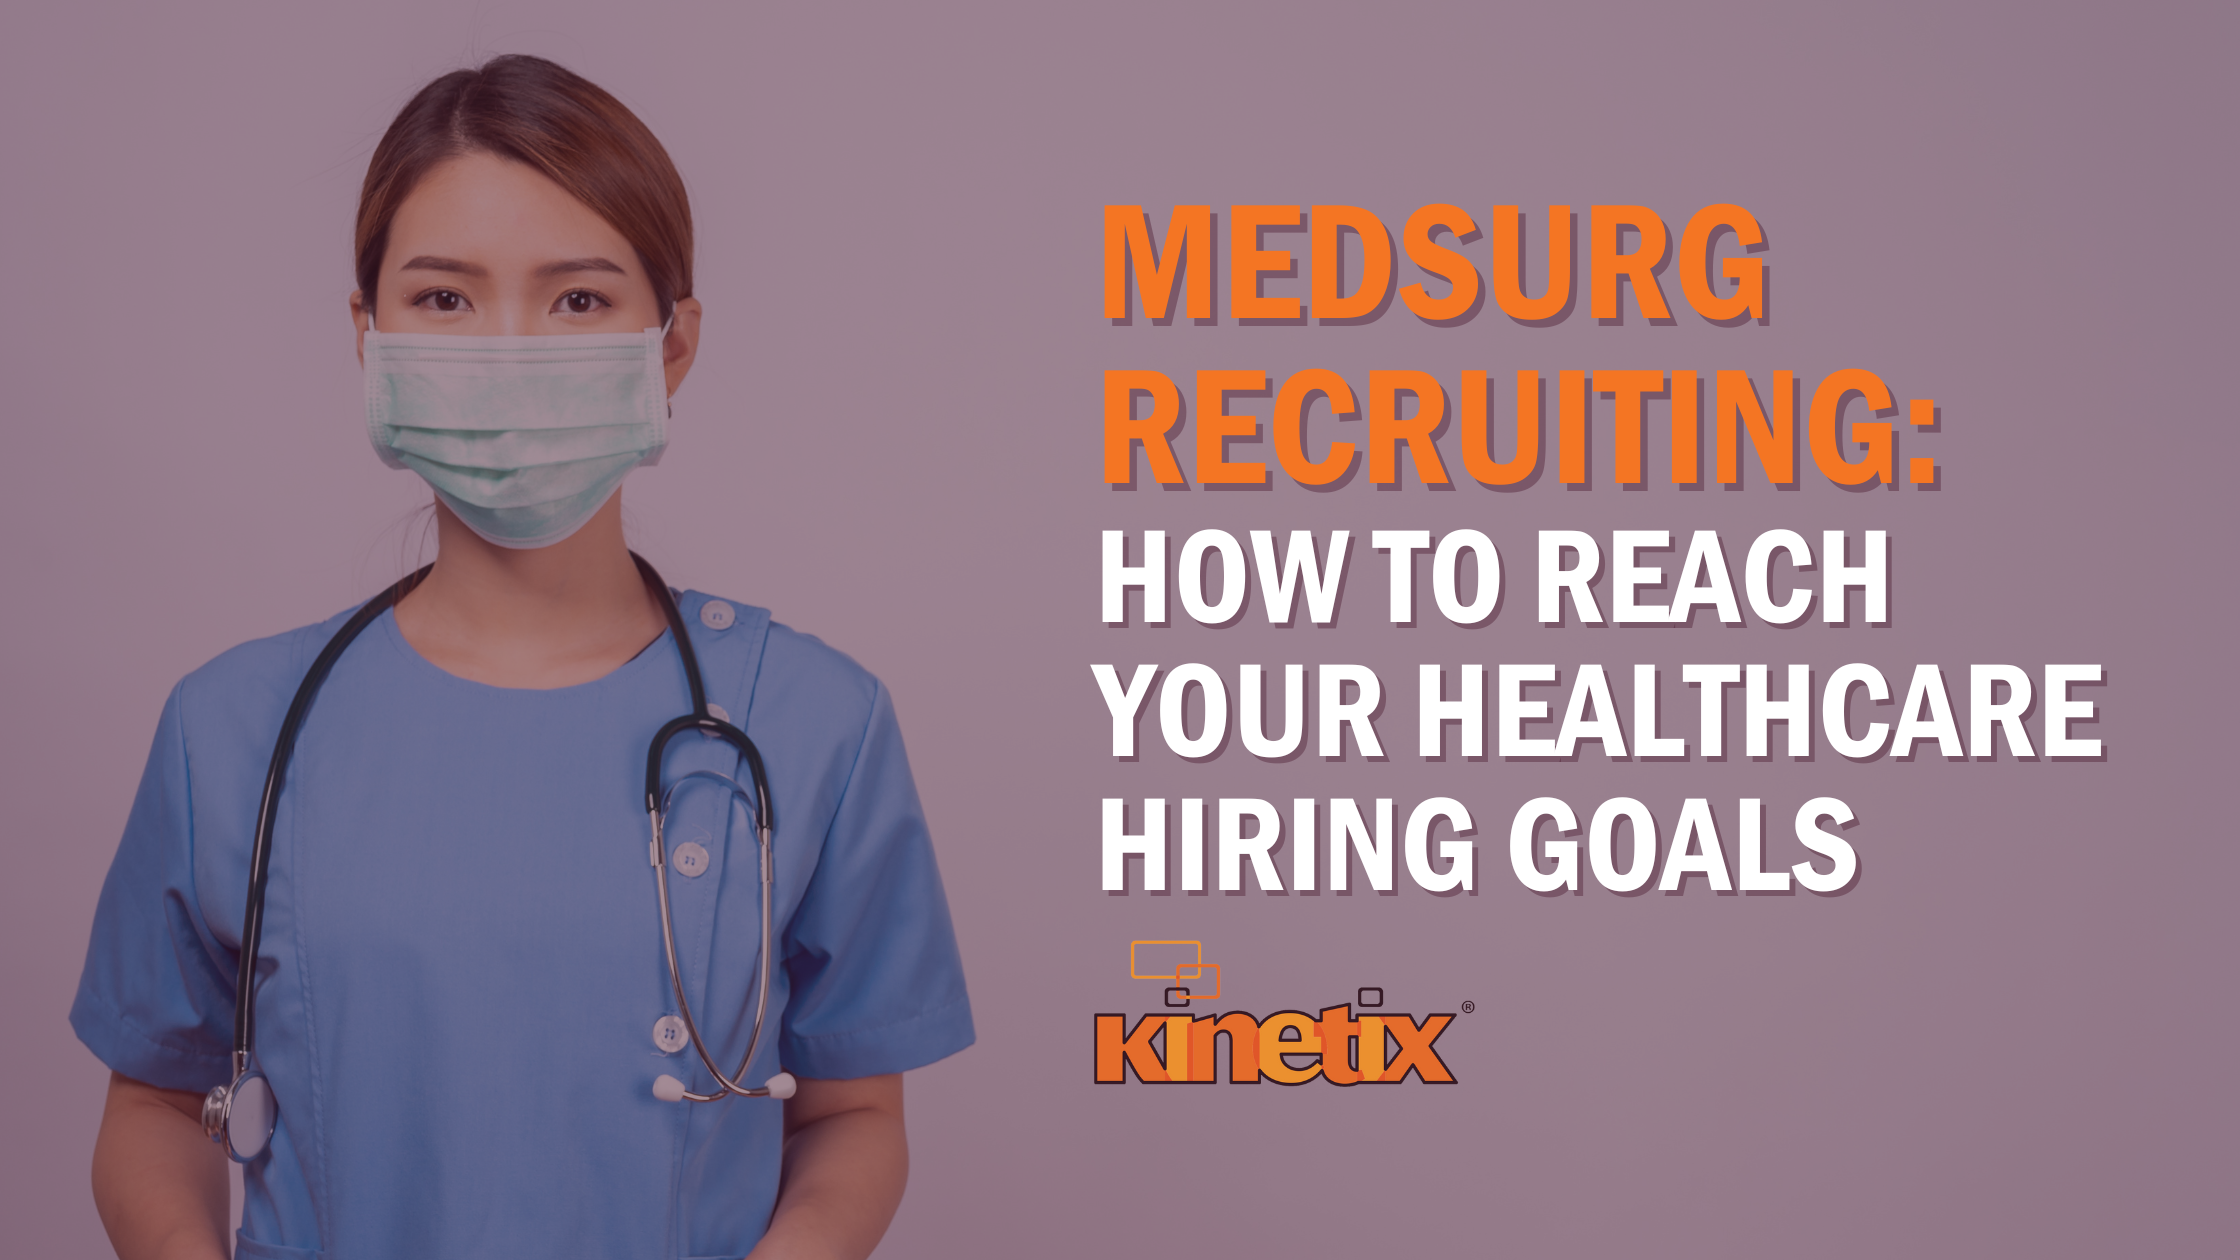 MedSurg Recruiting: How to Hire Quality Candidates Faster